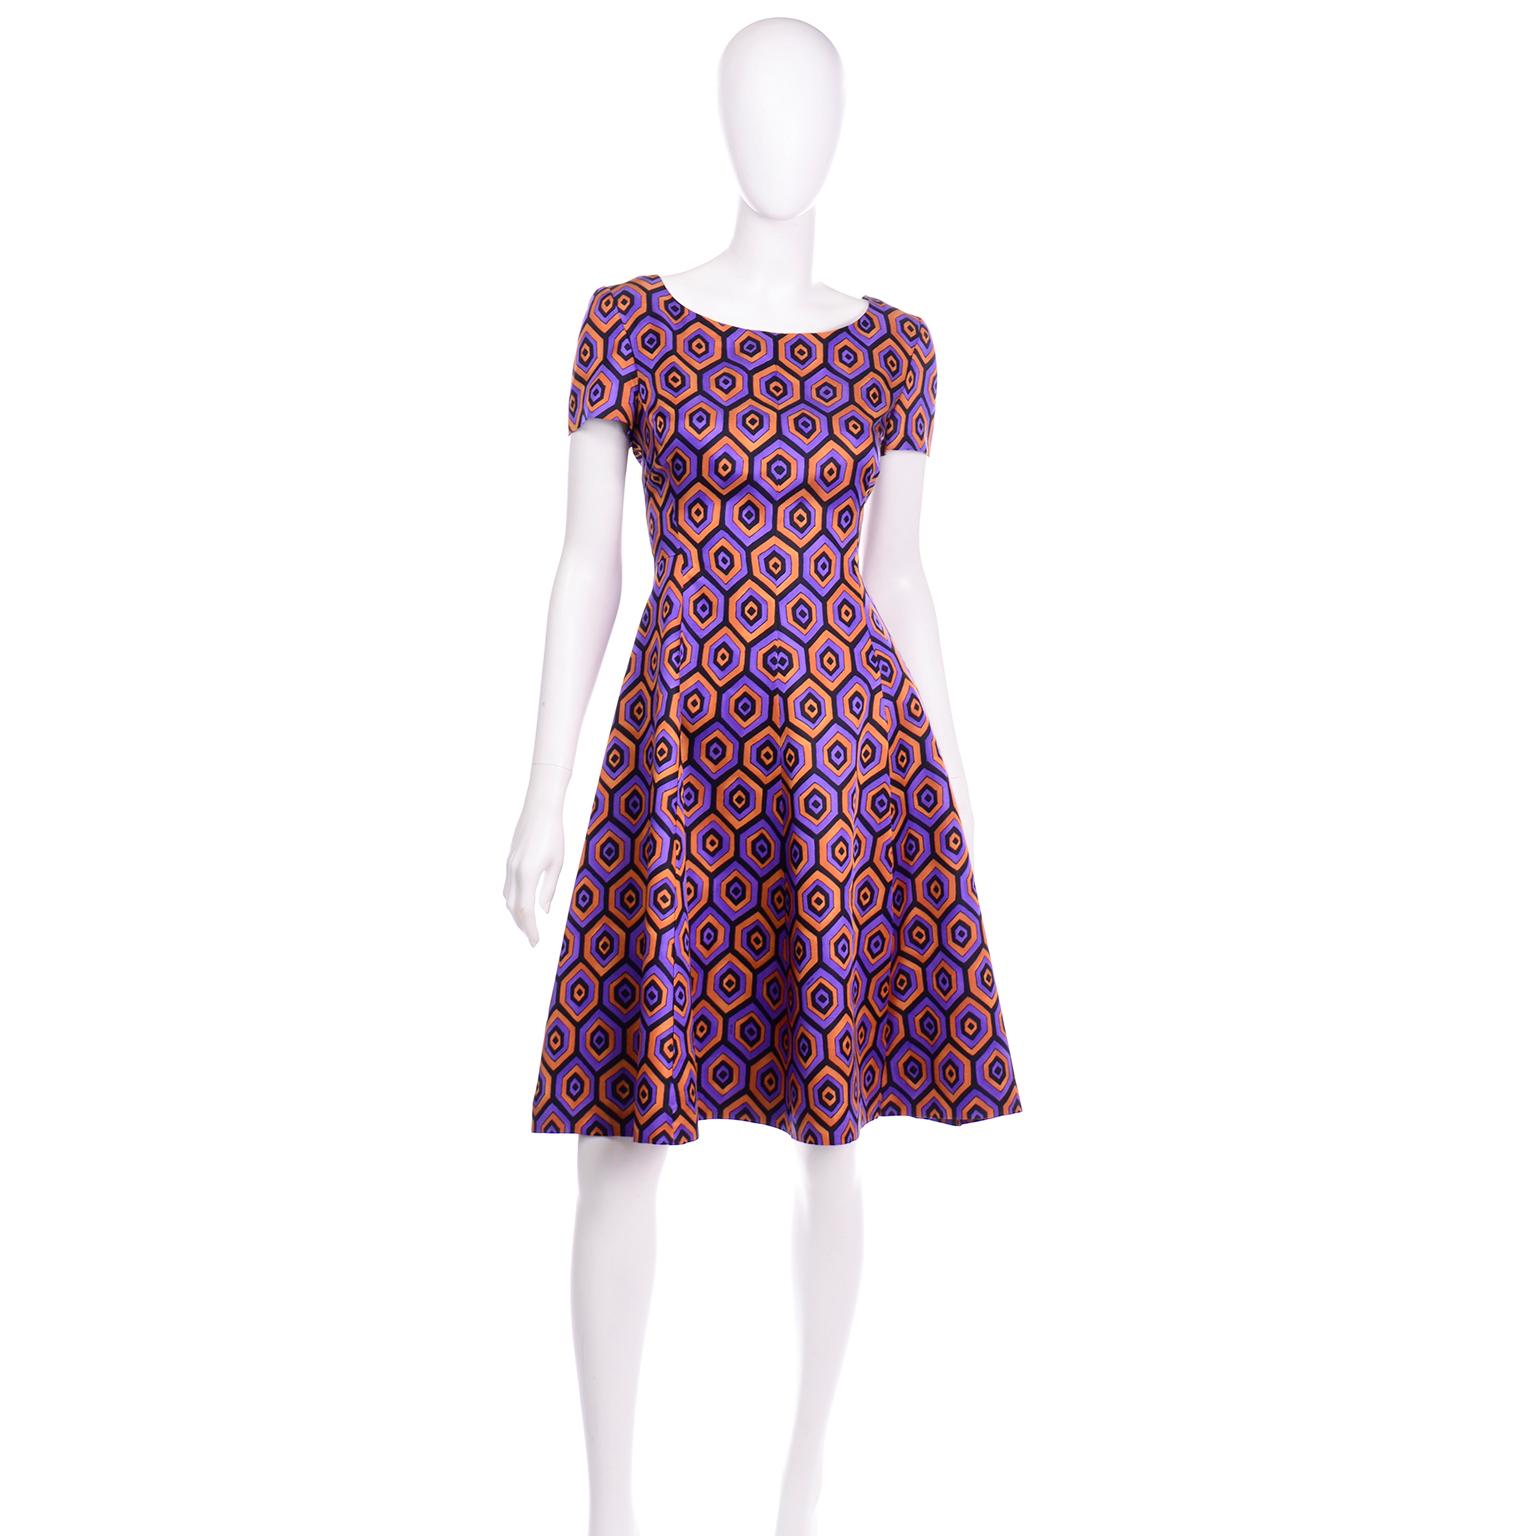 This fun short sleeve Prada dress is in a beautiful purple, orange, and black vertical hexagon pattern. This easy to wear dress has a scoop neckline and the skirt has a slight circle style silhouette. This dress is fully lined and there is a back